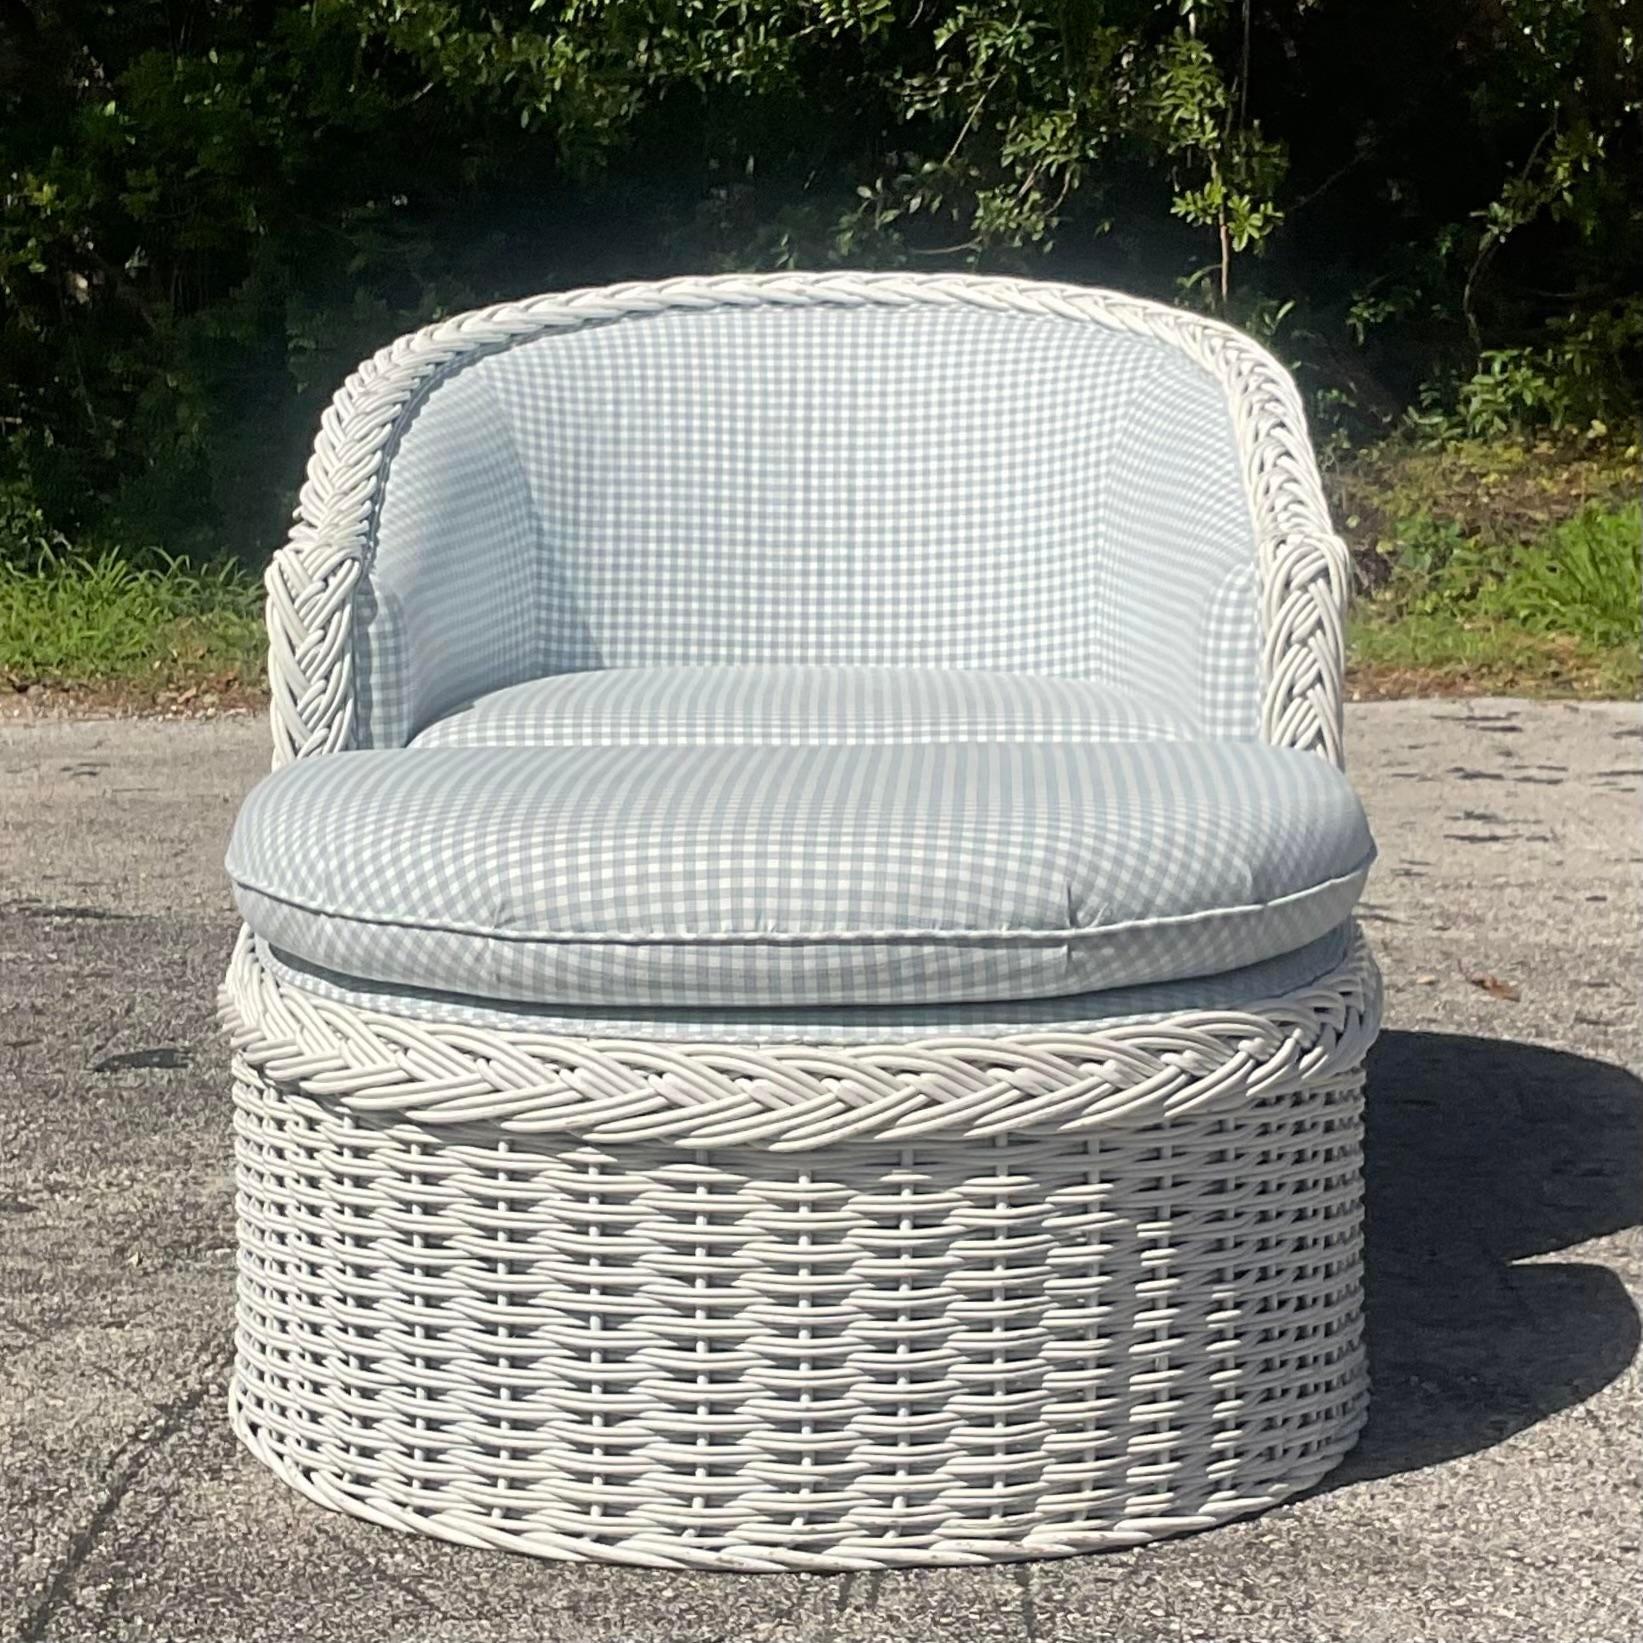 Transport yourself to seaside serenity with this Vintage Coastal Braided Rattan Lounge Chair and Ottoman. Crafted with meticulous attention to detail, this iconic duo epitomizes classic American coastal style. The intertwining rattan exudes natural